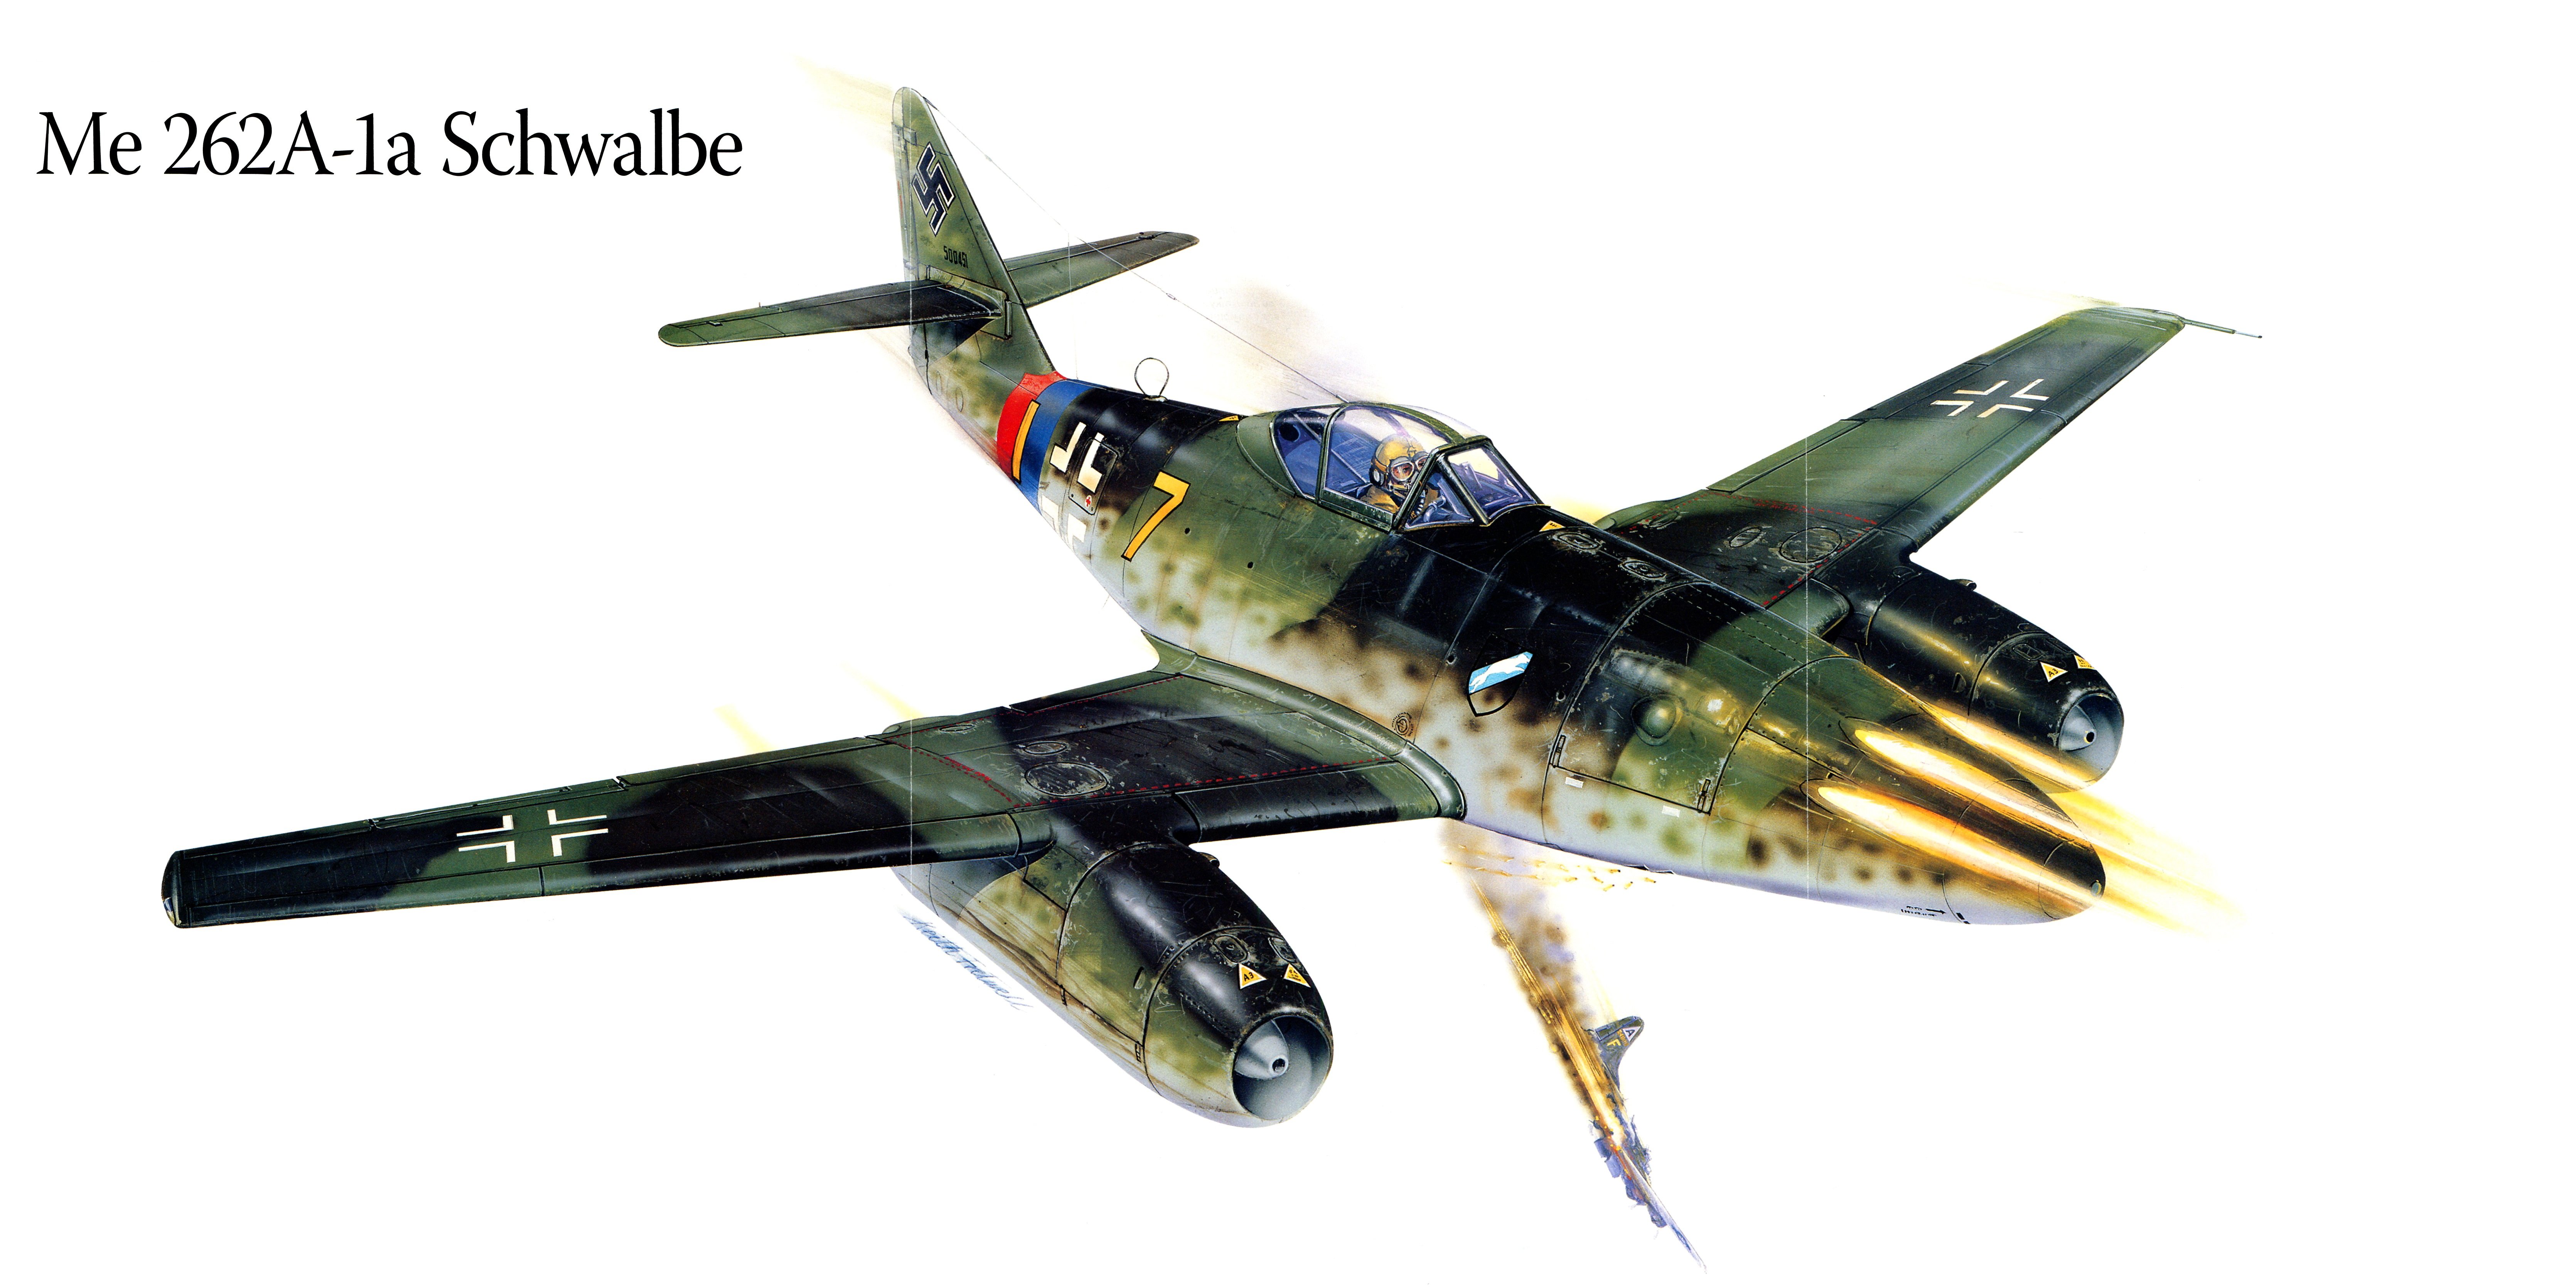 me 262a 1a, Schwalbe, Military, War, Art, Painting, Airplane, Aircraft, Weapon, Fighter Wallpaper